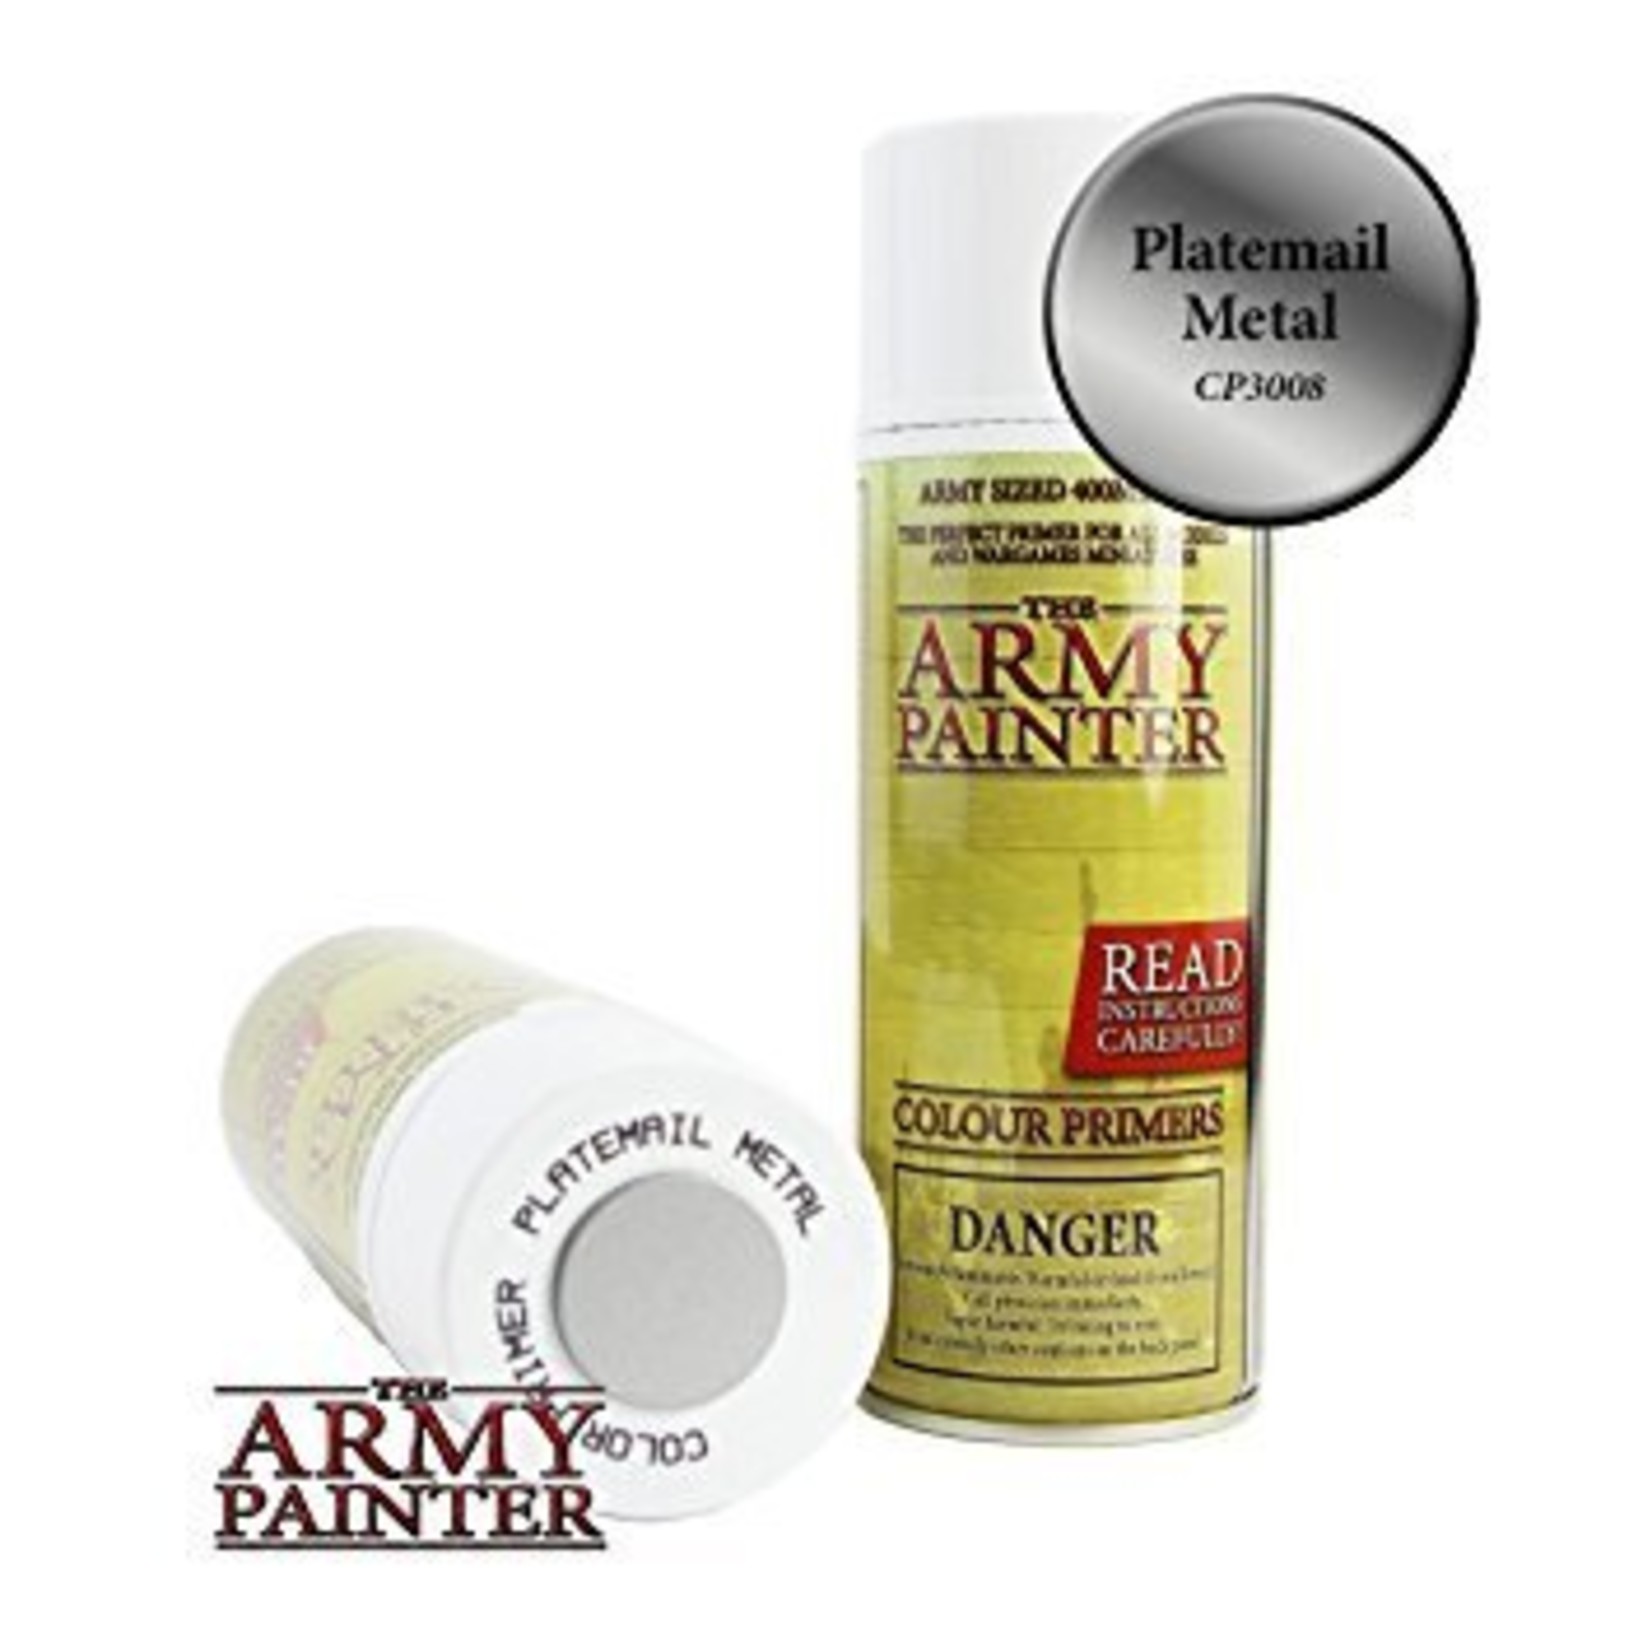 Army Painter Army Painter - Primer - Plate Mail Metal - Phoenix